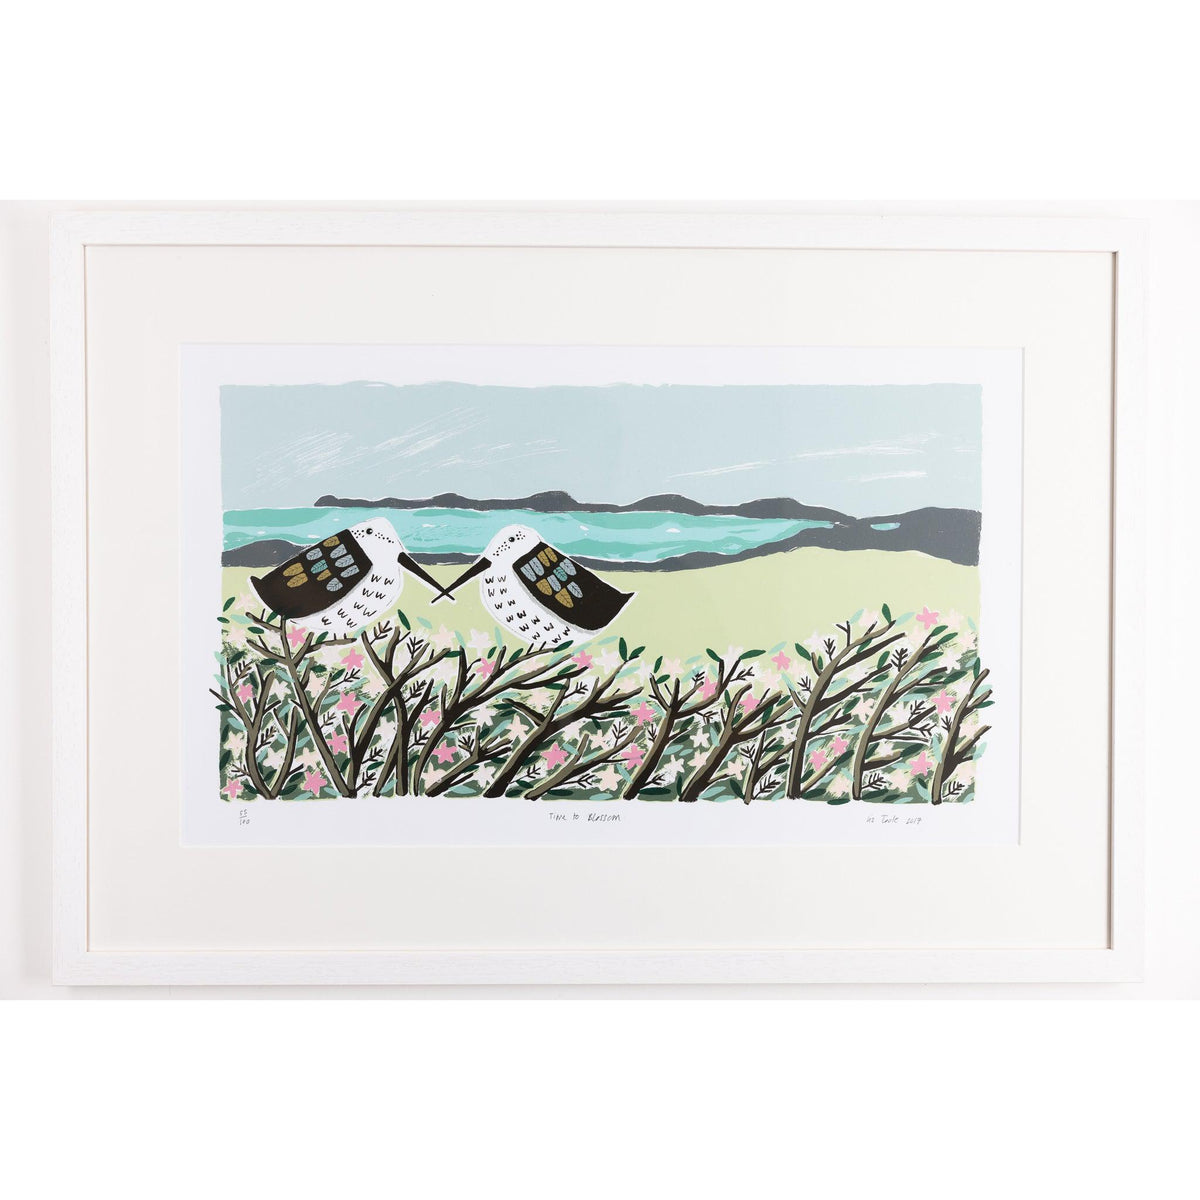 &#39;Time to Blossom&#39; framed, limited edition print by Liz Toole at Padstow Gallery, Cornwall.